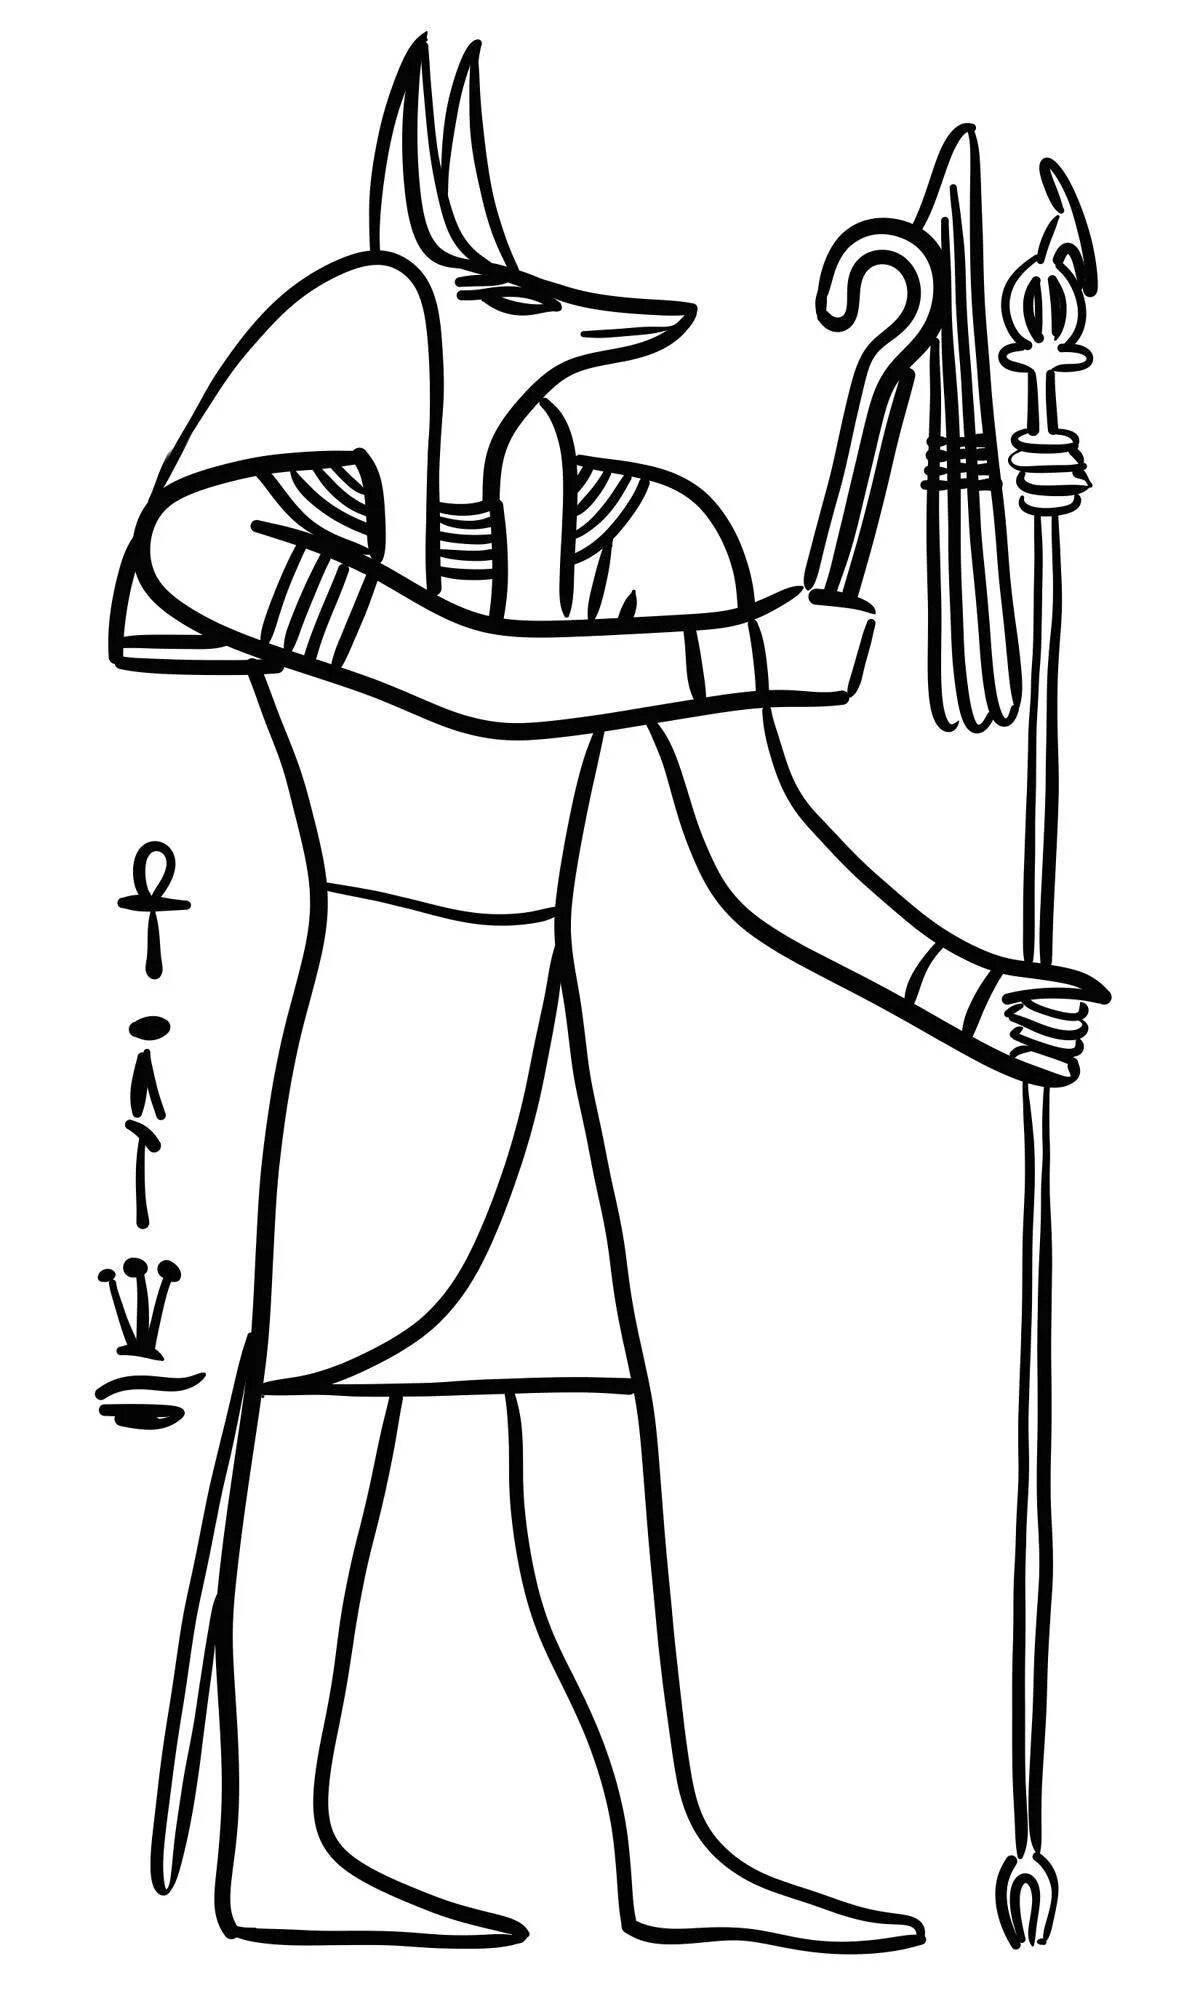 Exquisite god ra coloring page